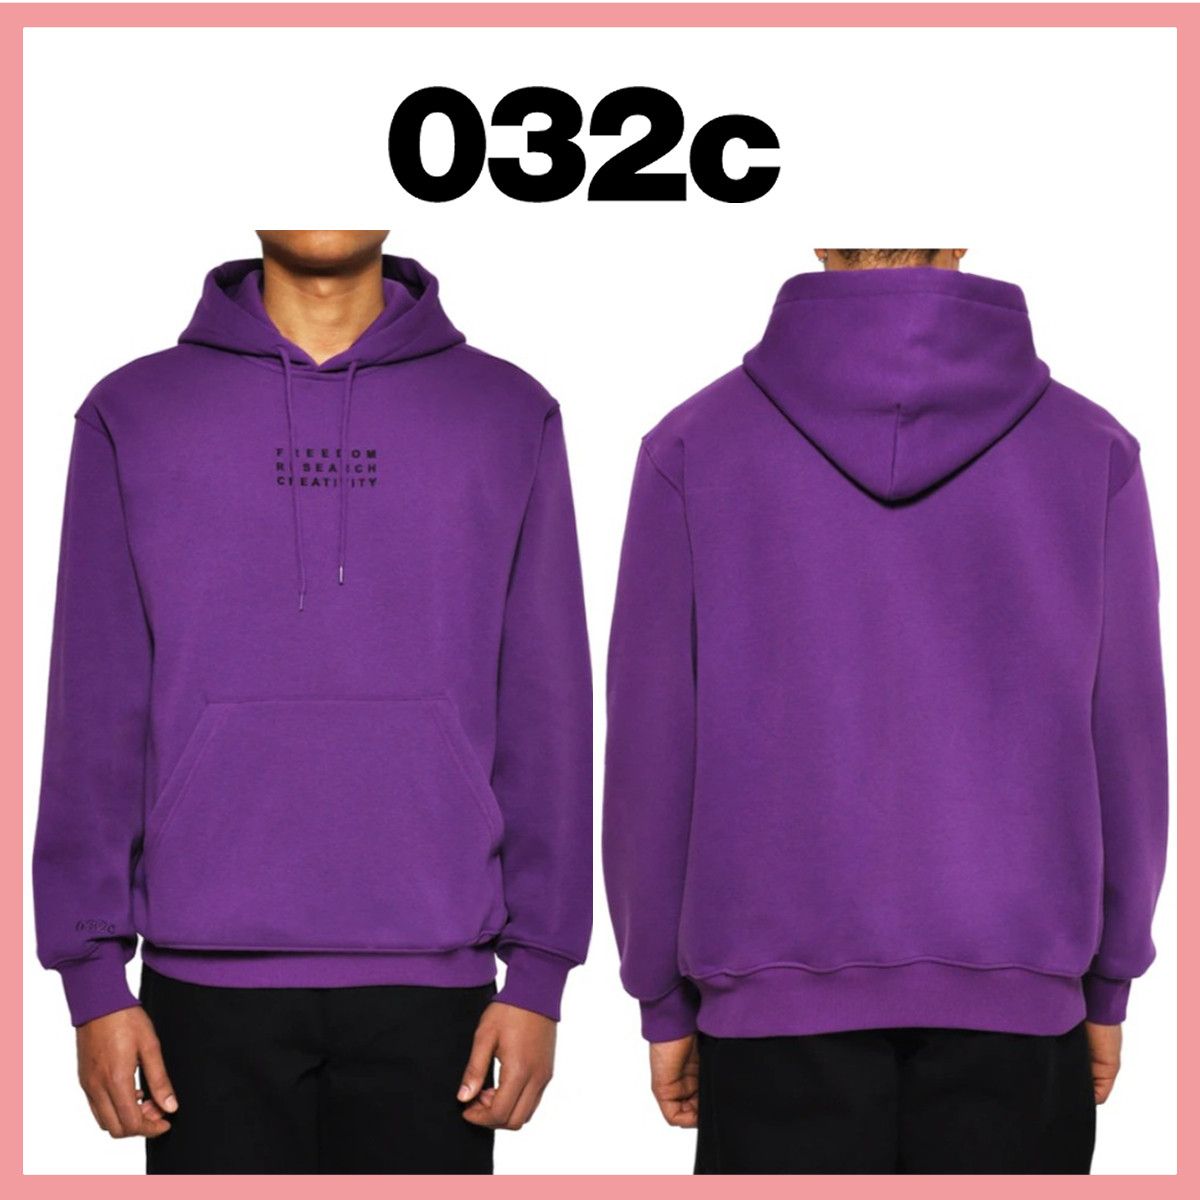 032c vo16 032c hoodie Size US M / EU 48-50 / 2 - 1 Preview